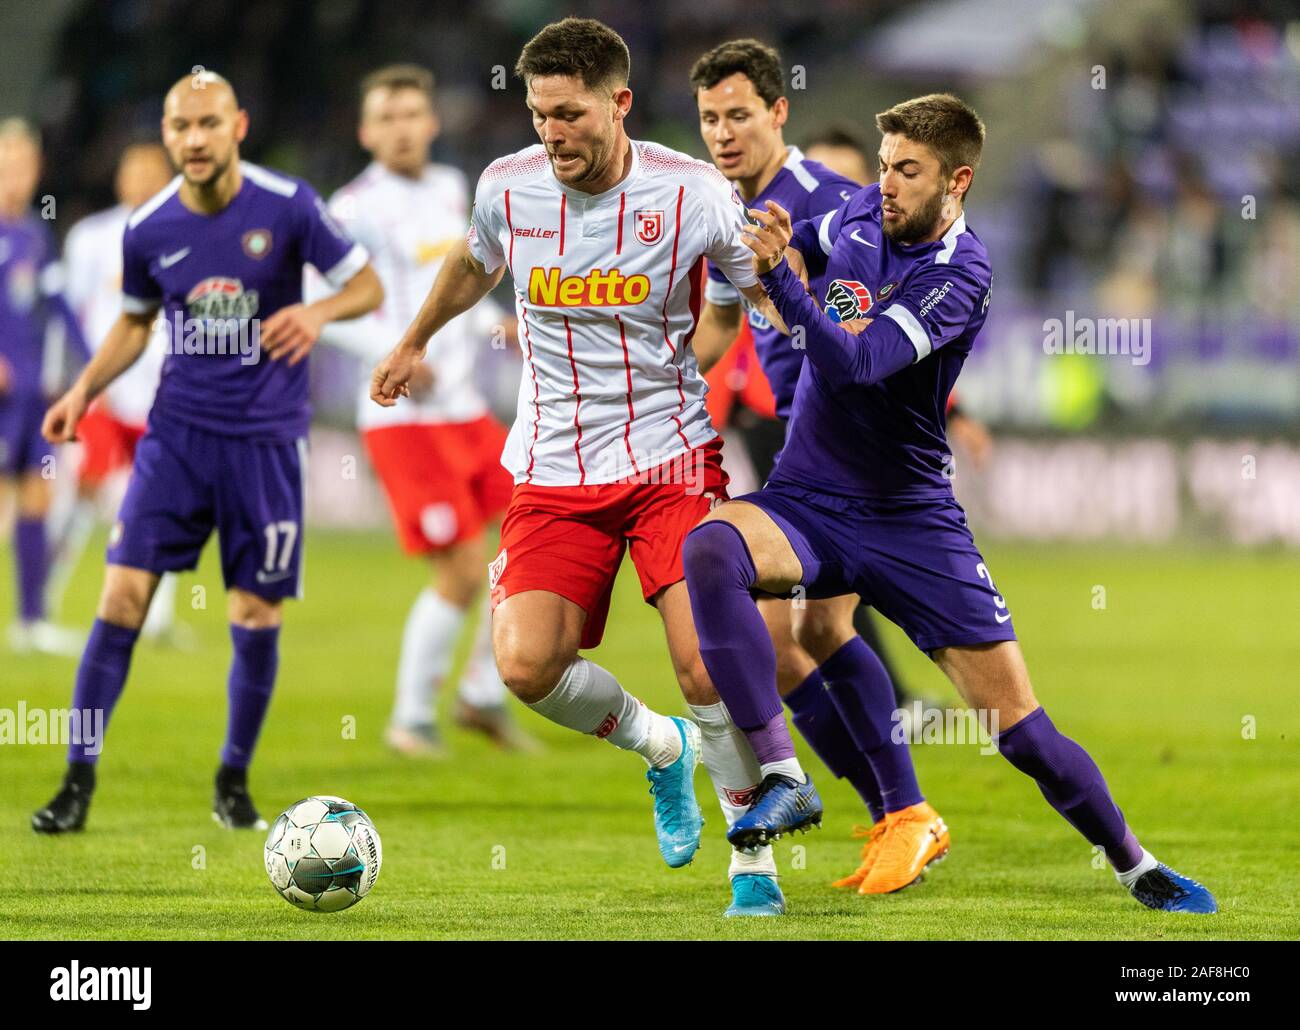 Aue, Germany. 13th Dec, 2019. Soccer: 2nd Bundesliga, FC Erzgebirge Aue - SSV Jahn Regensburg, 17th matchday, in the Sparkassen-Erzgebirgsstadion. Aues Marko Mihojevic (r) against Regensburg's Andreas Albers. Credit: Robert Michael/dpa-Zentralbild/dpa - IMPORTANT NOTE: In accordance with the requirements of the DFL Deutsche Fußball Liga or the DFB Deutscher Fußball-Bund, it is prohibited to use or have used photographs taken in the stadium and/or the match in the form of sequence images and/or video-like photo sequences./dpa/Alamy Live News Stock Photo